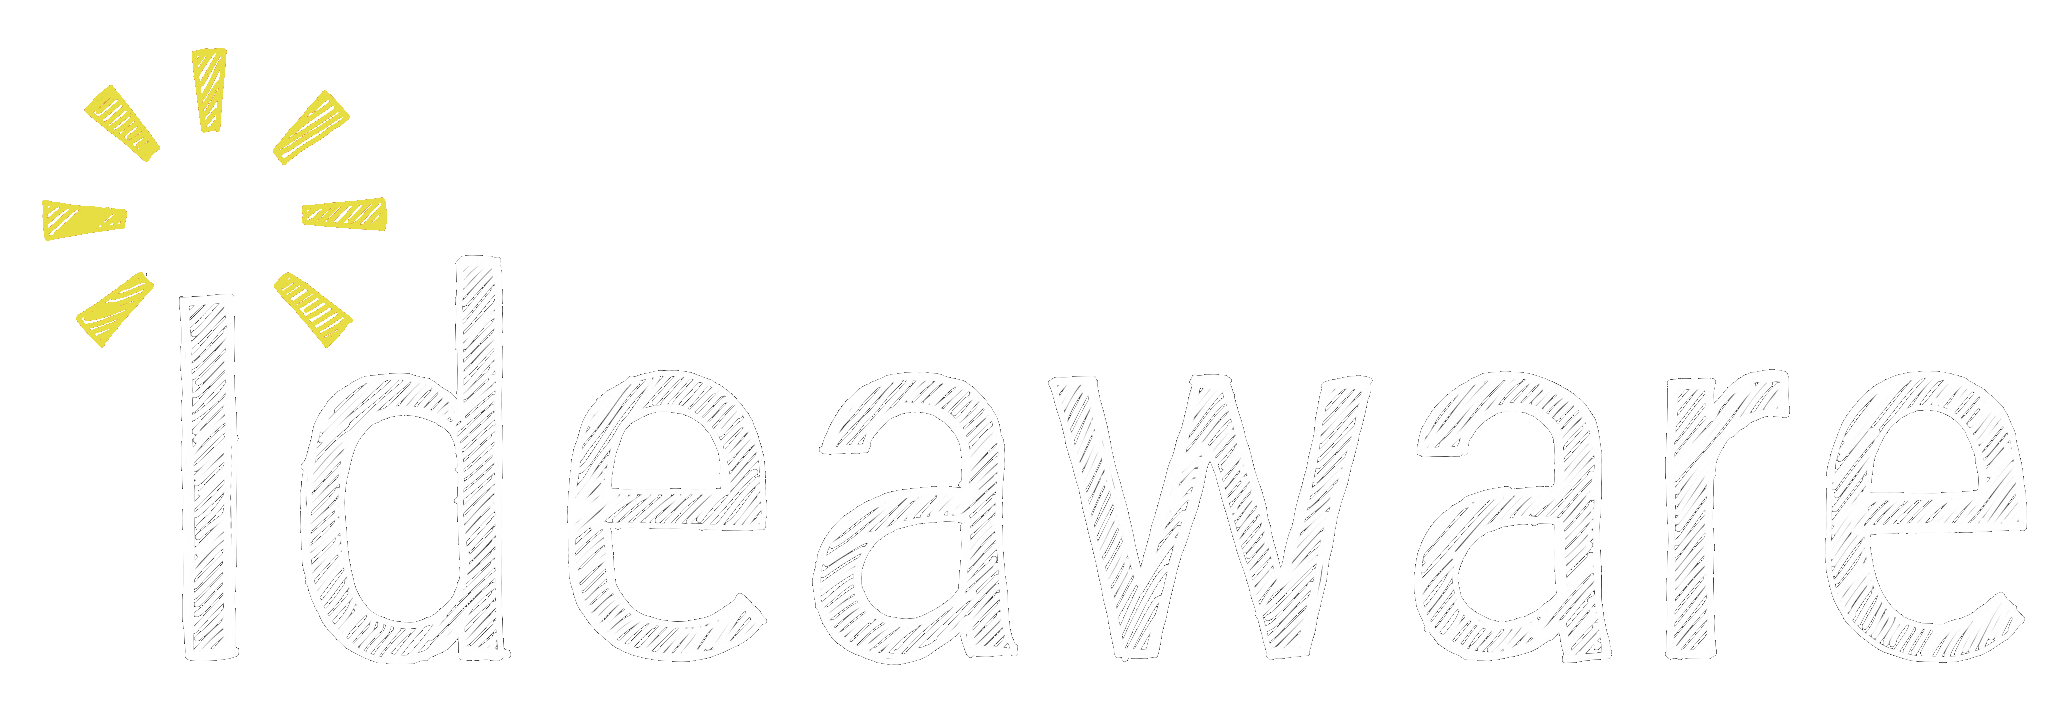 Ideaware Group